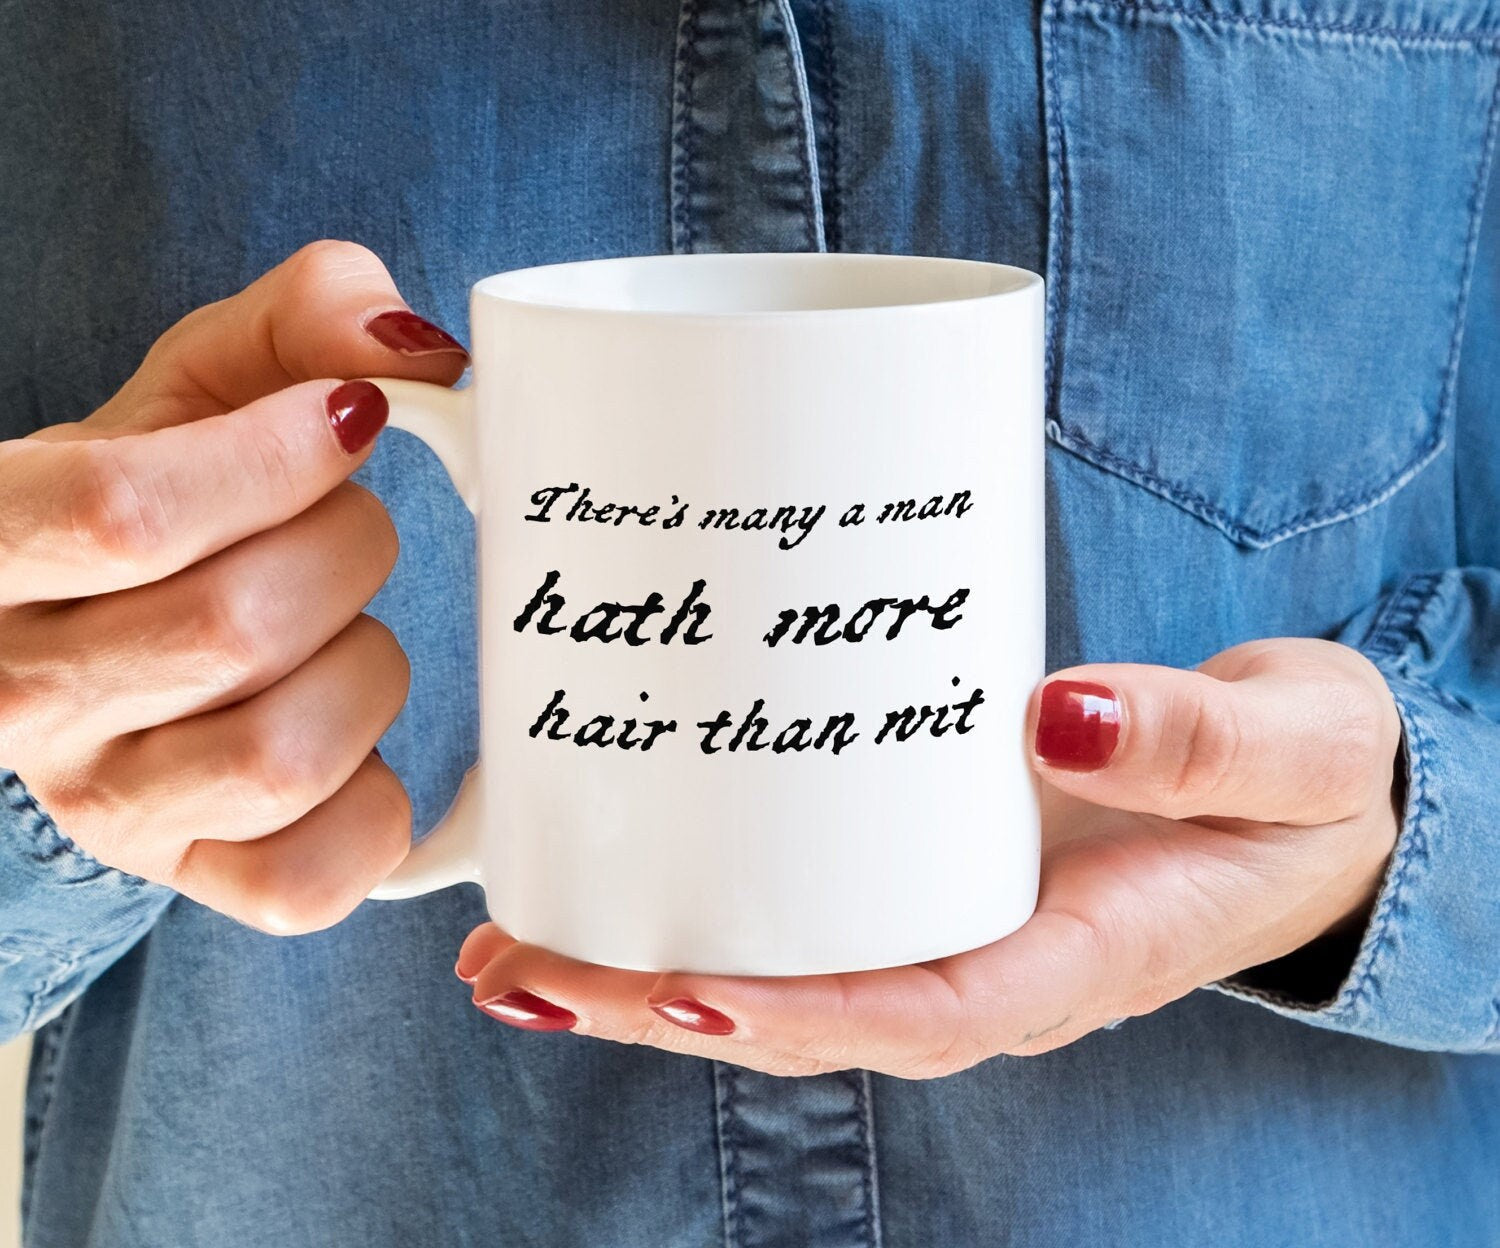 Shakespeare Funny Quote Coffee Mug, There's Many A Man Hath More Hair Than Wit